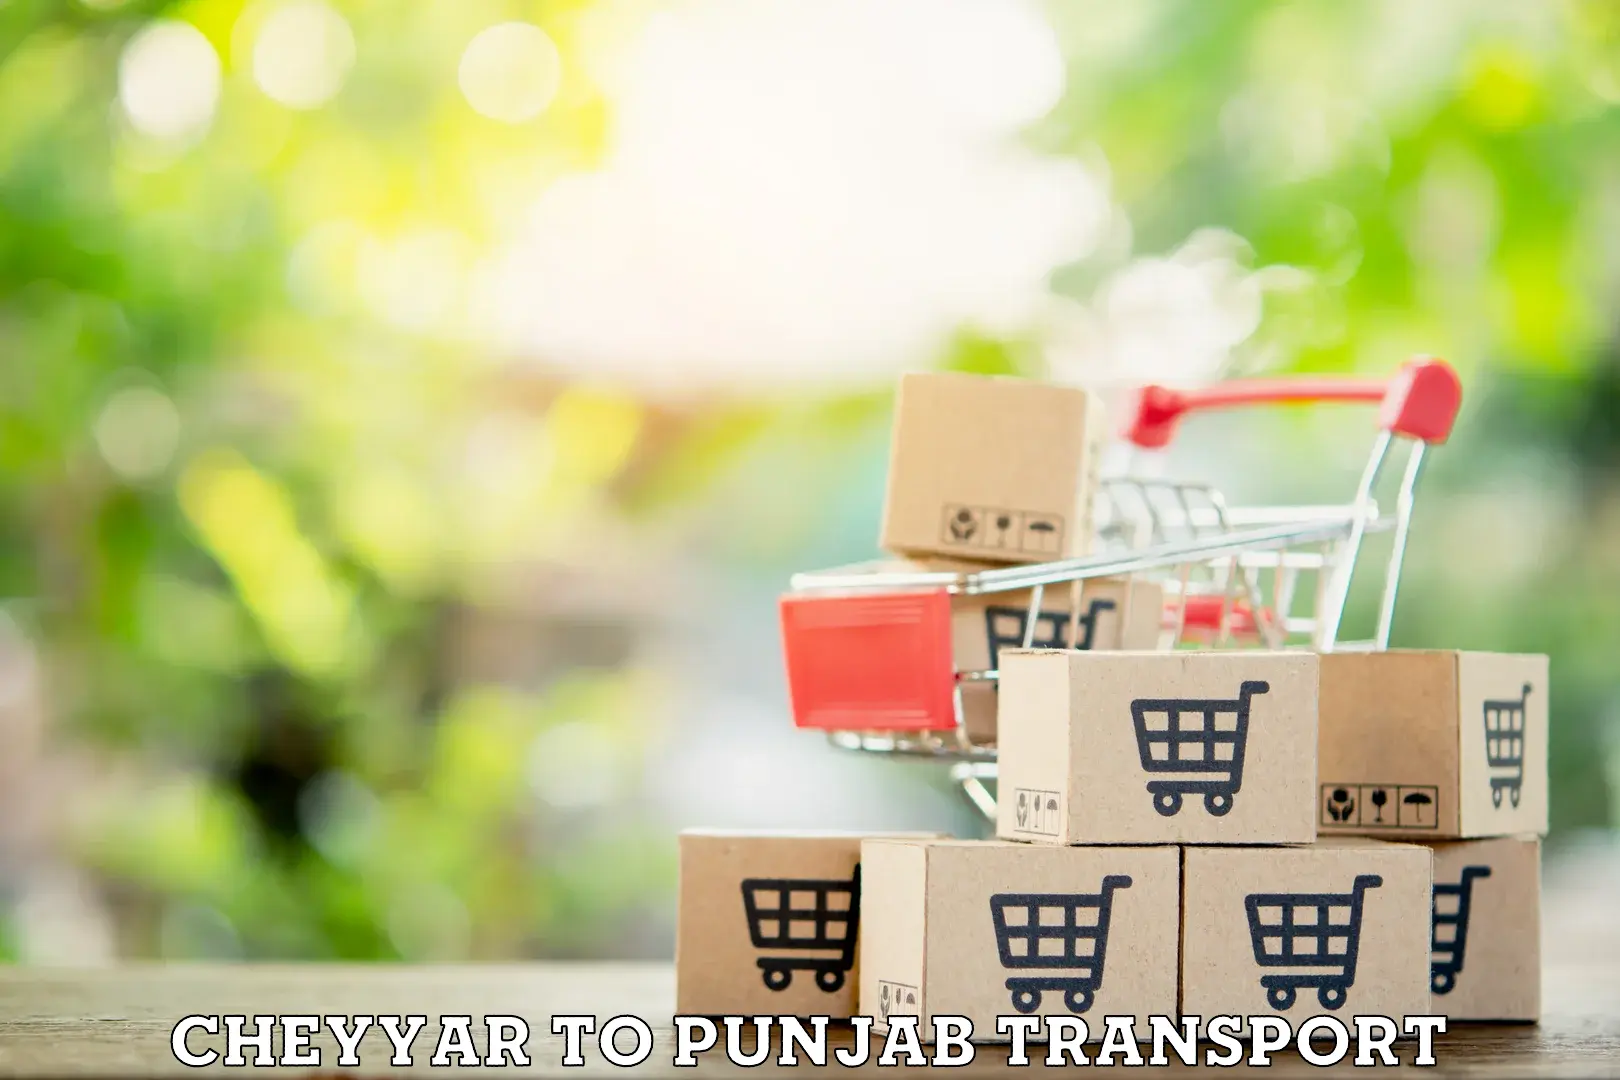 Express transport services Cheyyar to Ludhiana